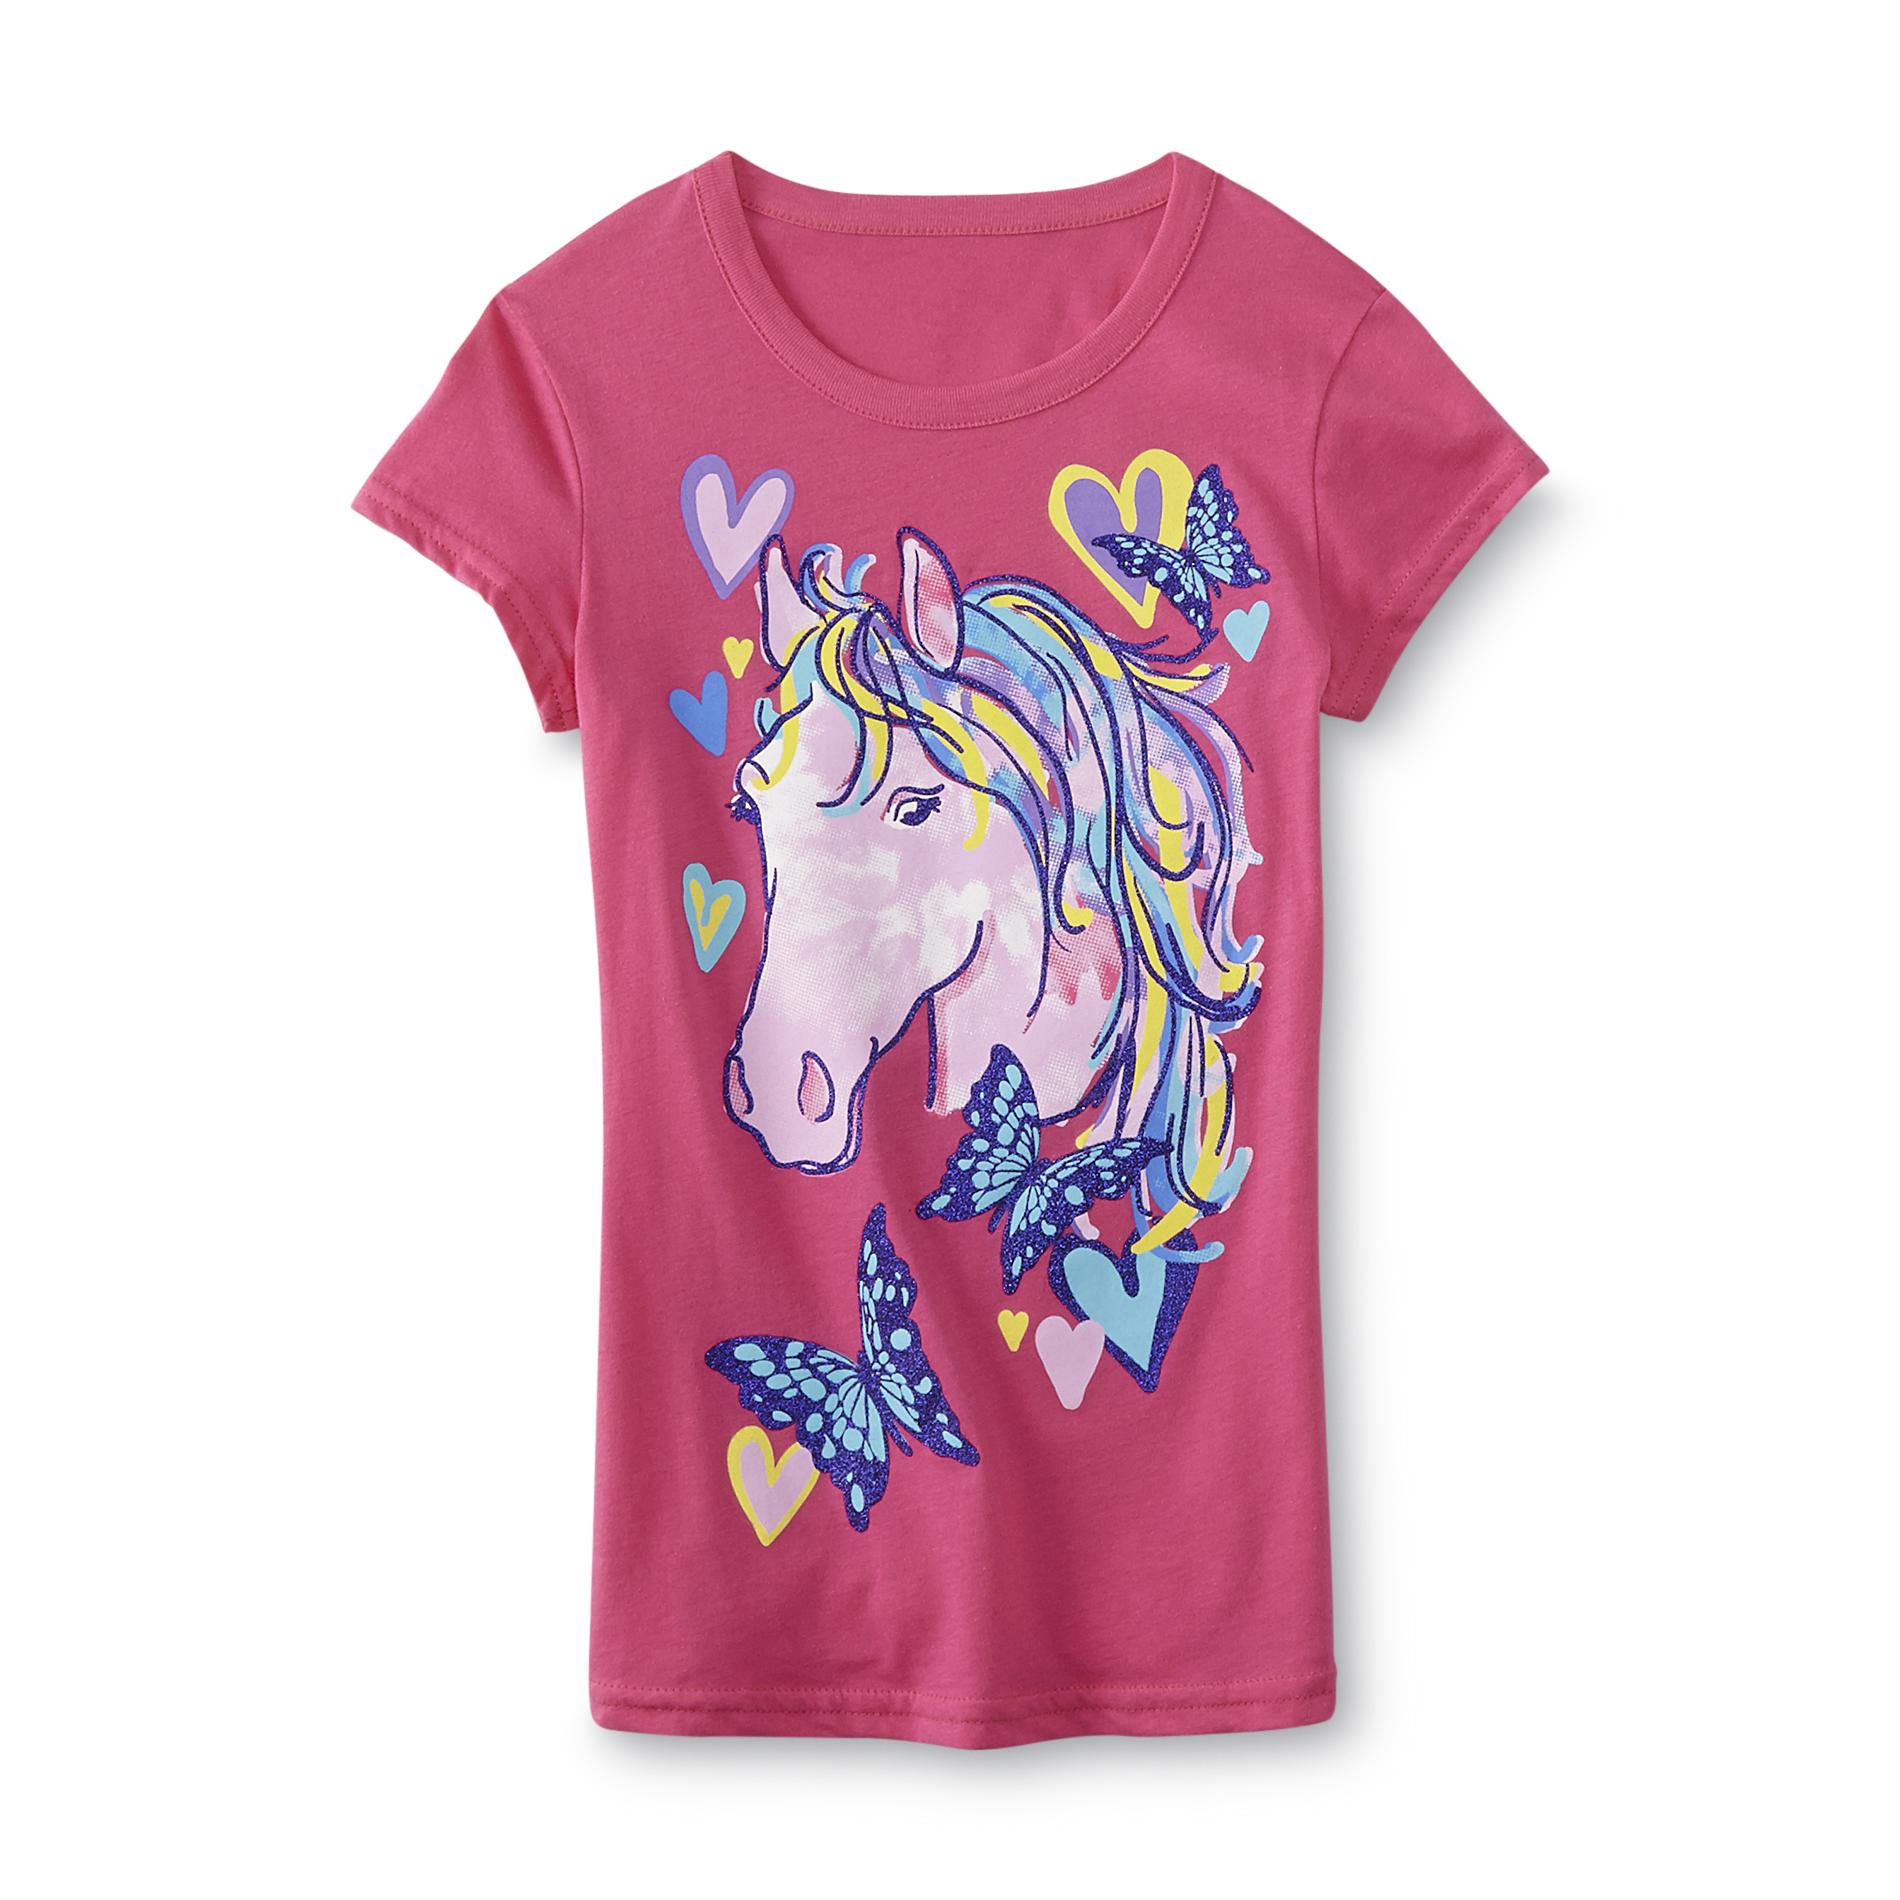 Route 66 Girl's Graphic T-Shirt - Horse